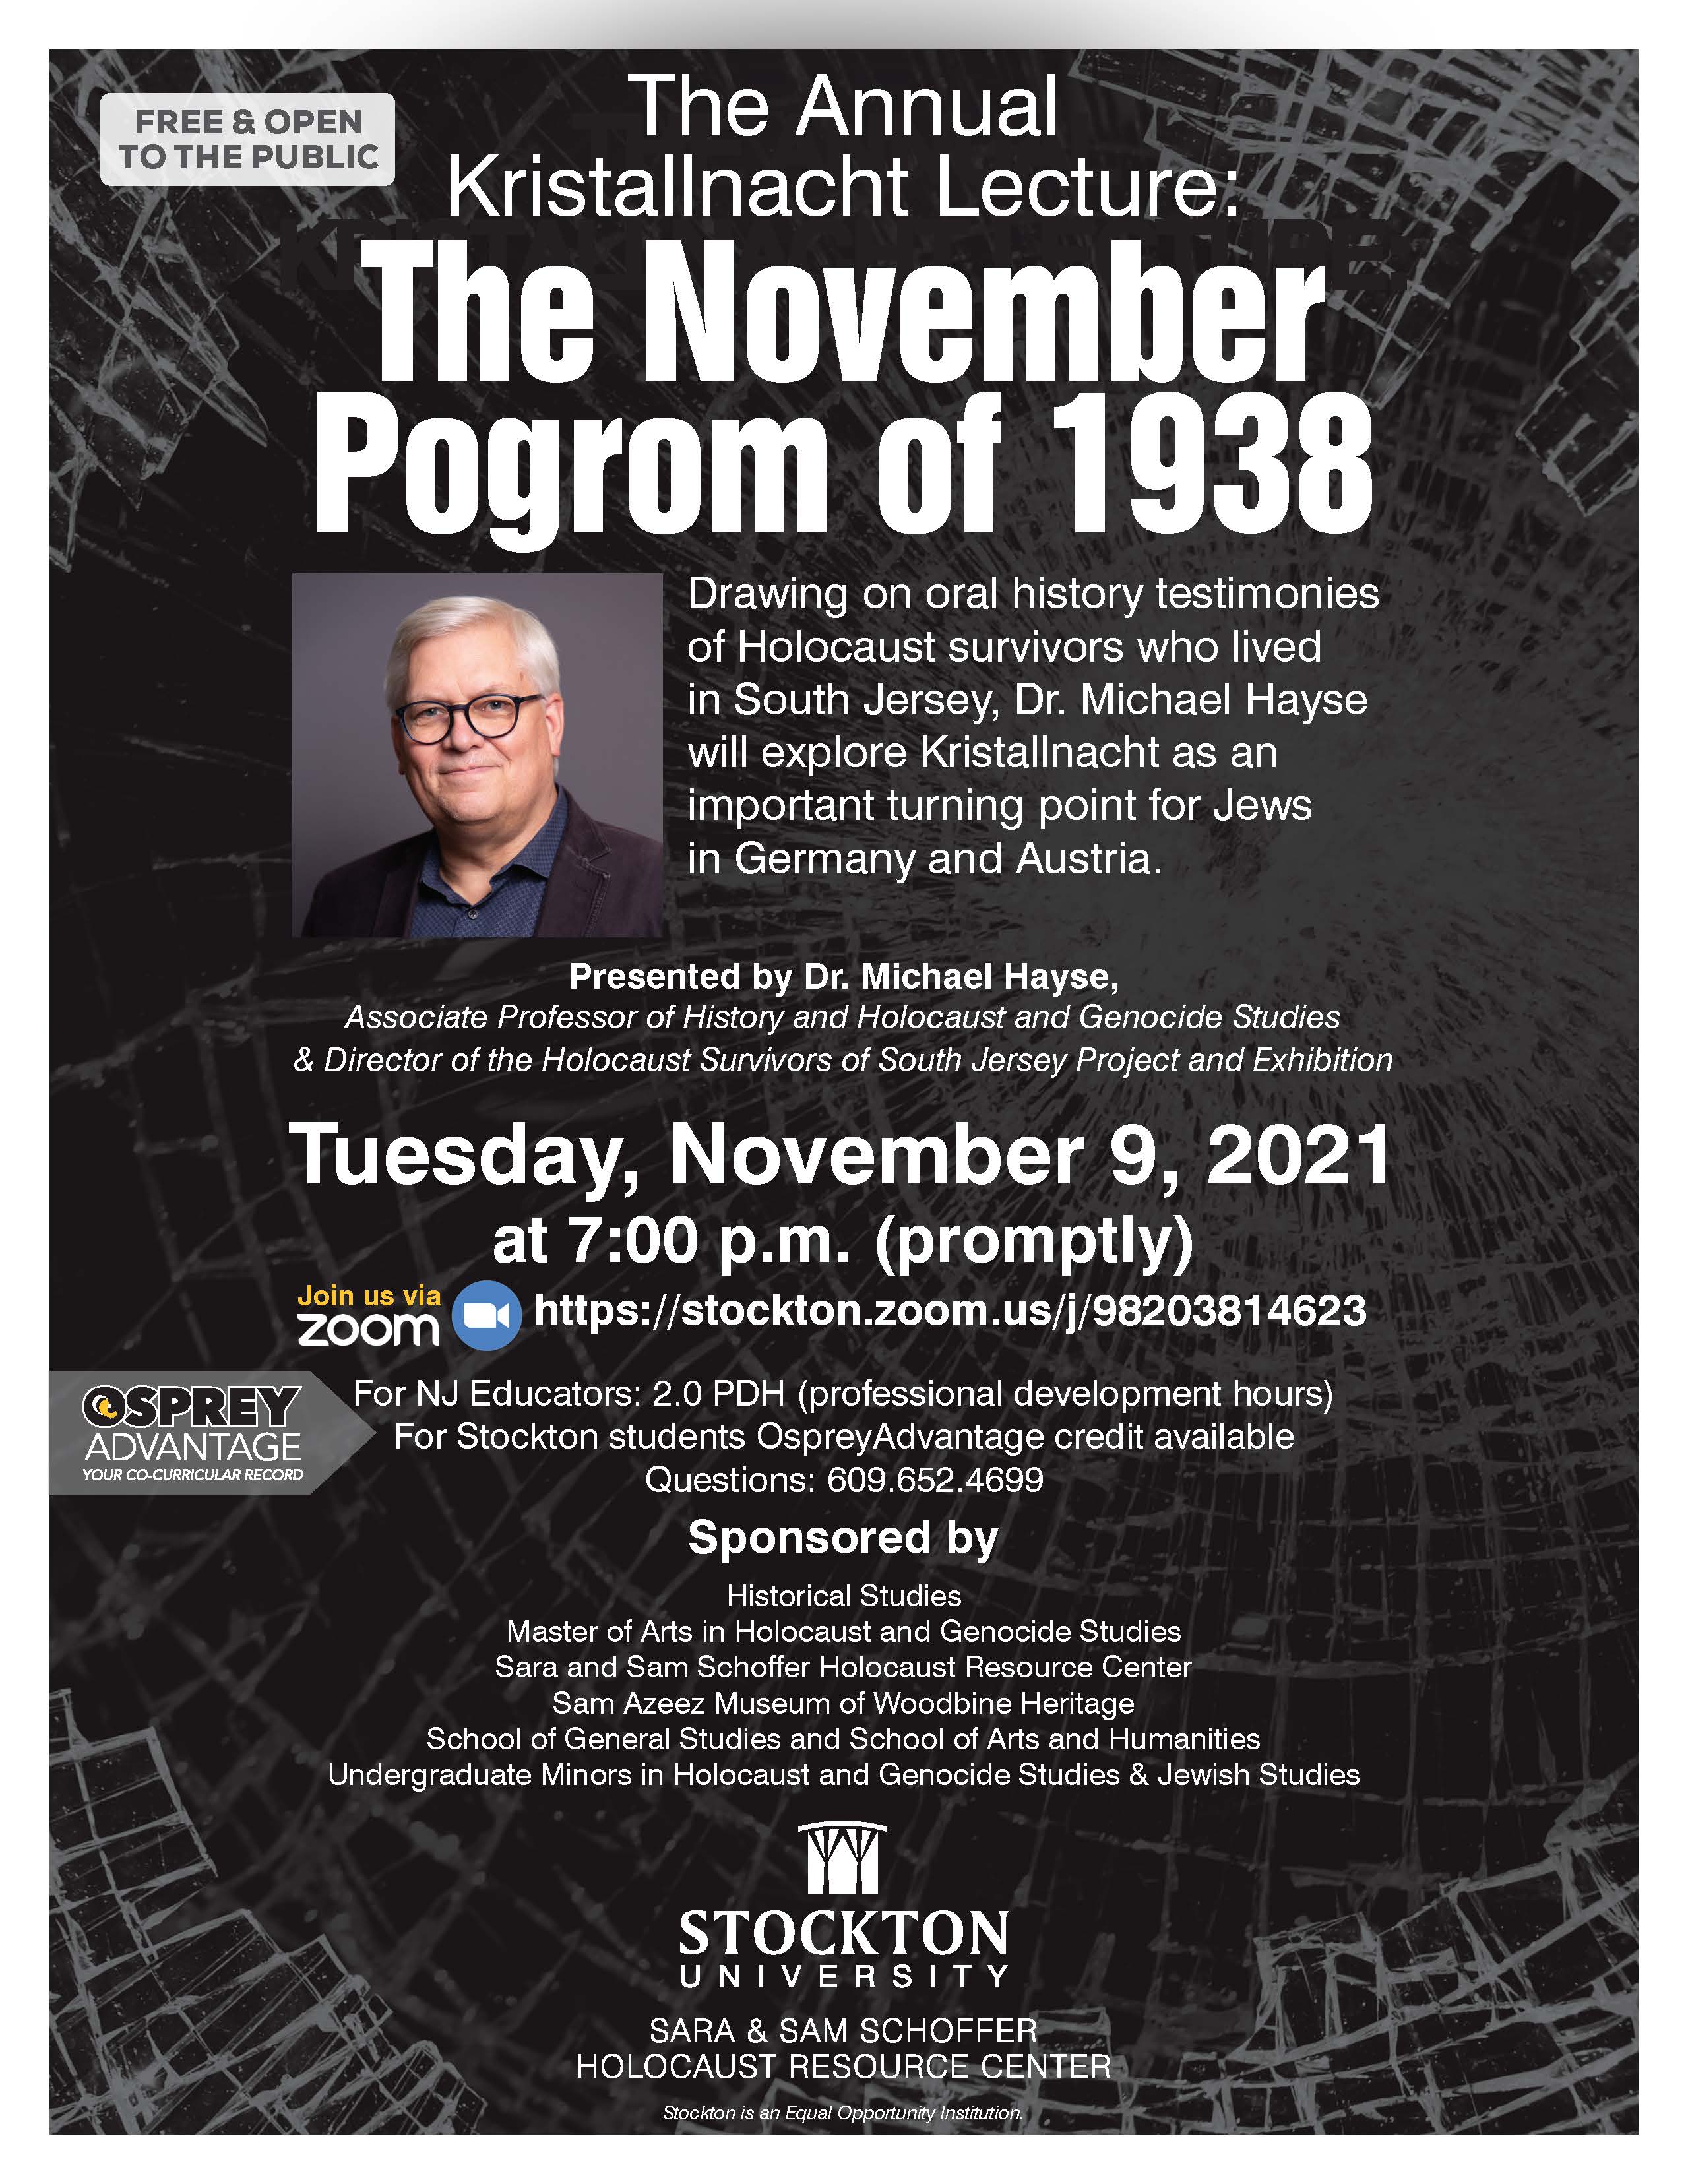 The Annual Kristallnacht Lecture Flyer 2021